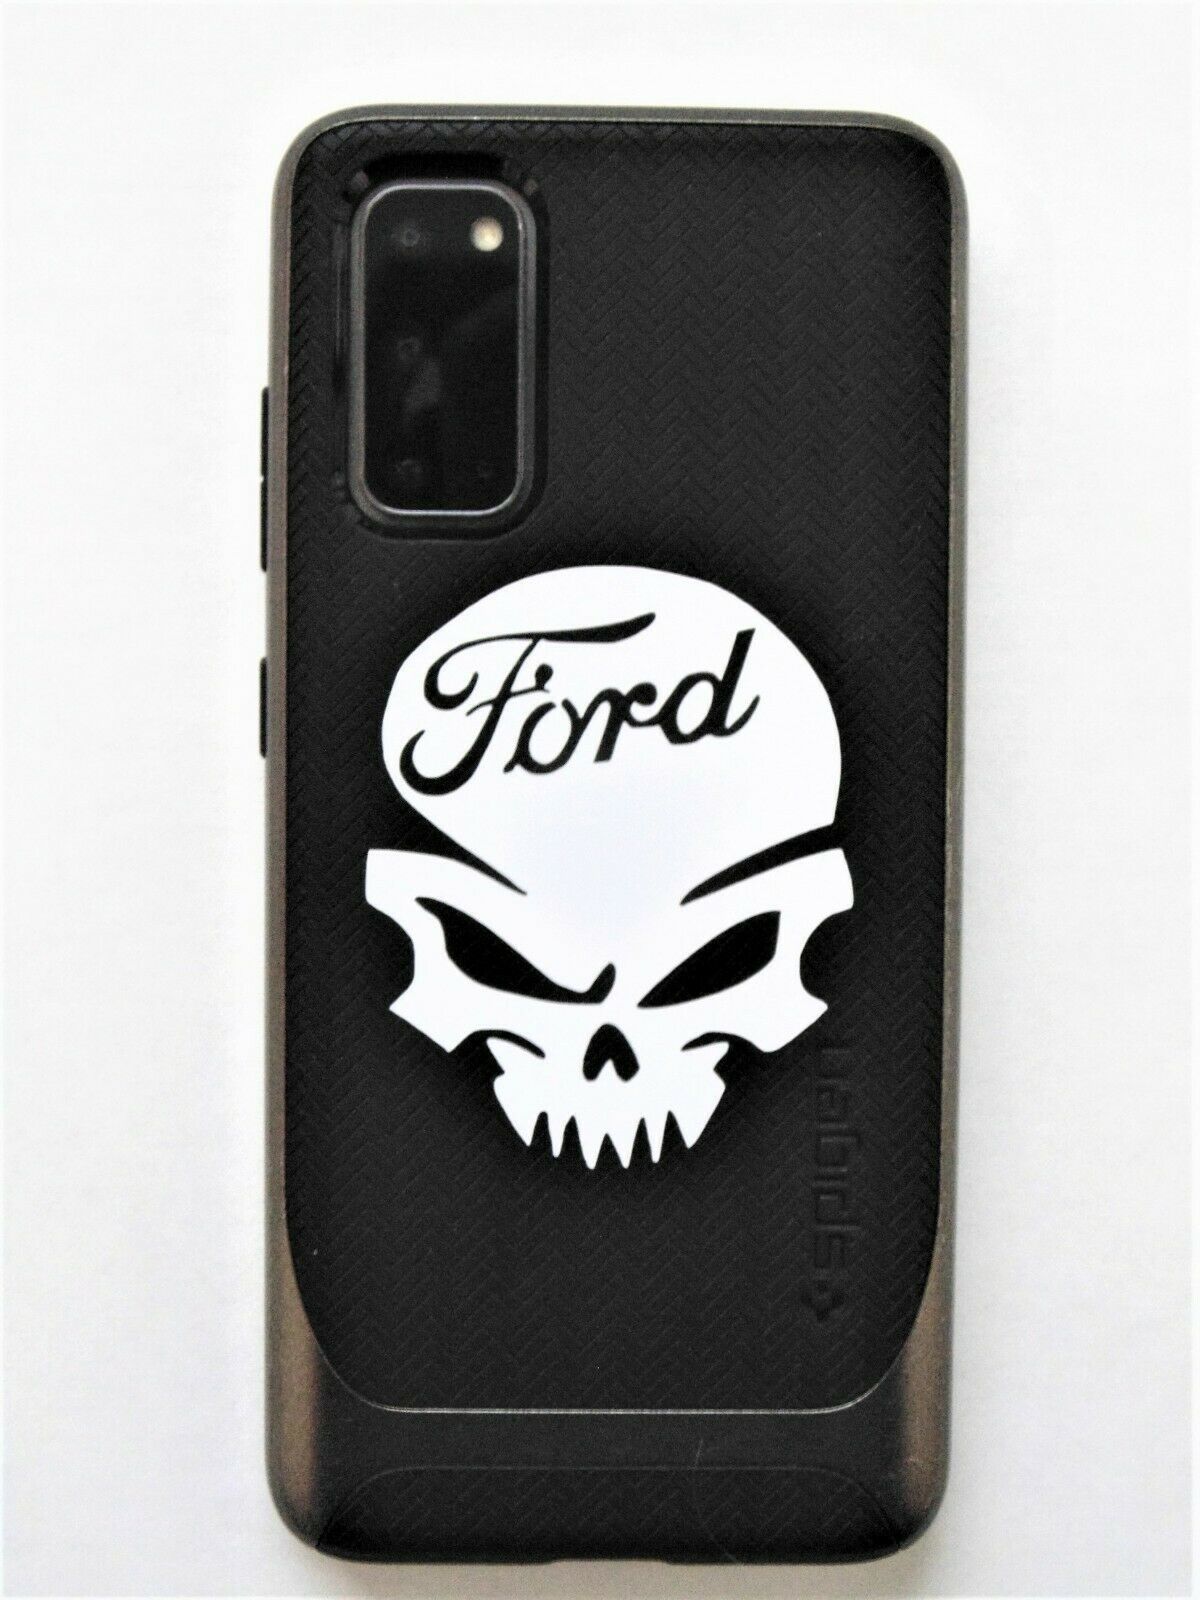 (3x) Ford Skull Cell Phone Ipad Itouch Die-Cut Vinyl Decal Sticker